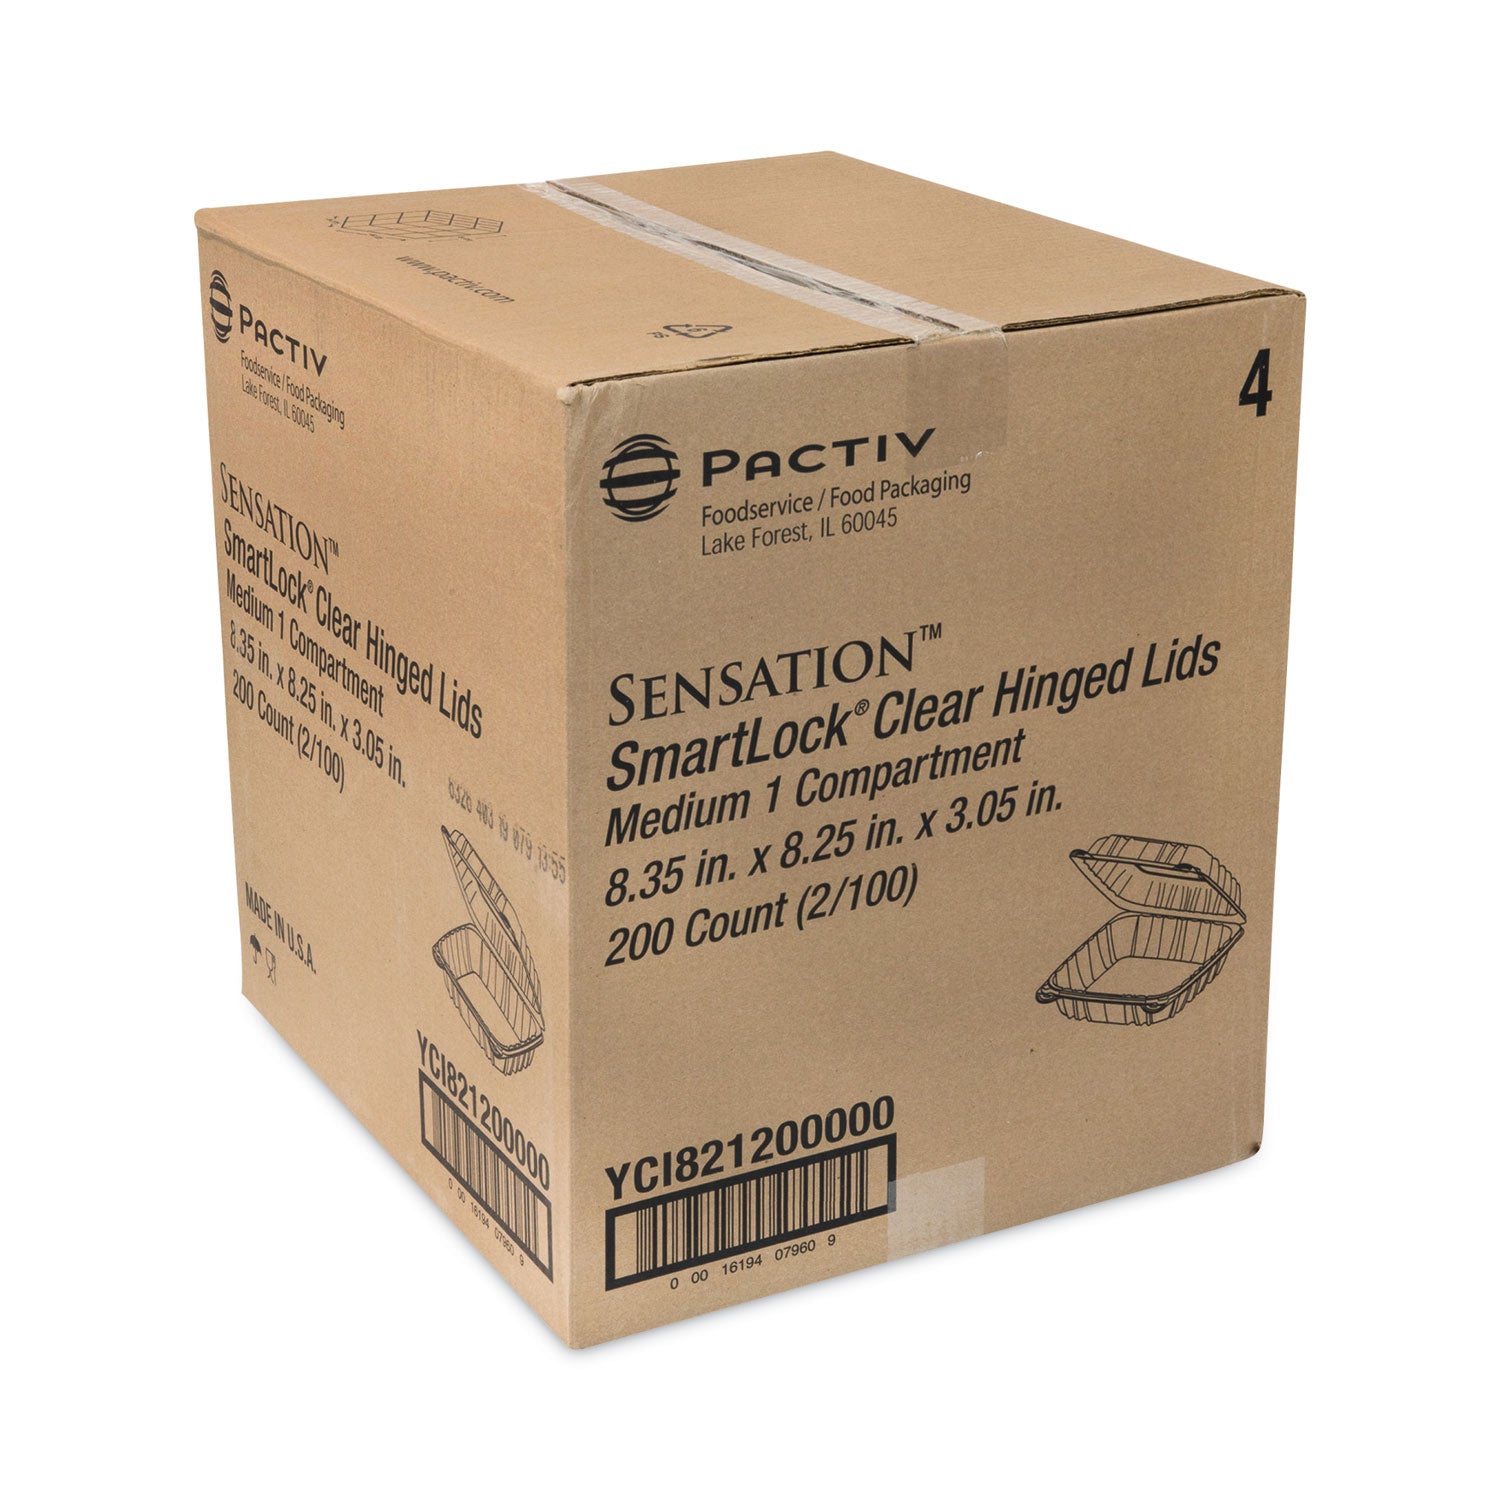 sensation-smartlock-hinged-lid-container-834-x-824-x-305-clear-plastic-200-carton_pctyci821200000 - 3